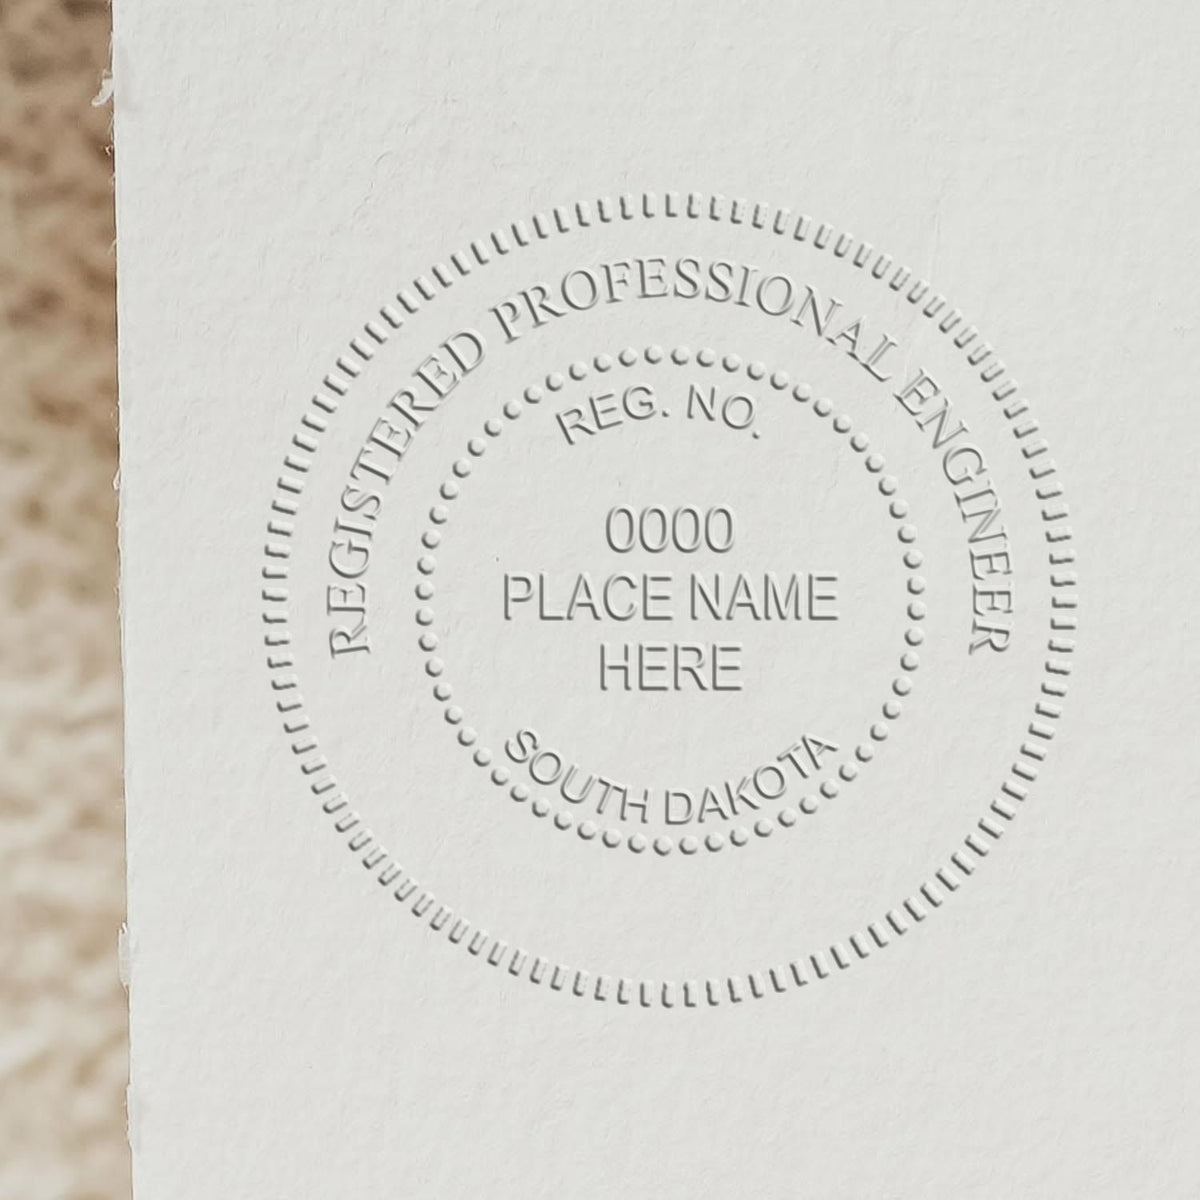 The Heavy Duty Cast Iron South Dakota Engineer Seal Embosser stamp impression comes to life with a crisp, detailed photo on paper - showcasing true professional quality.